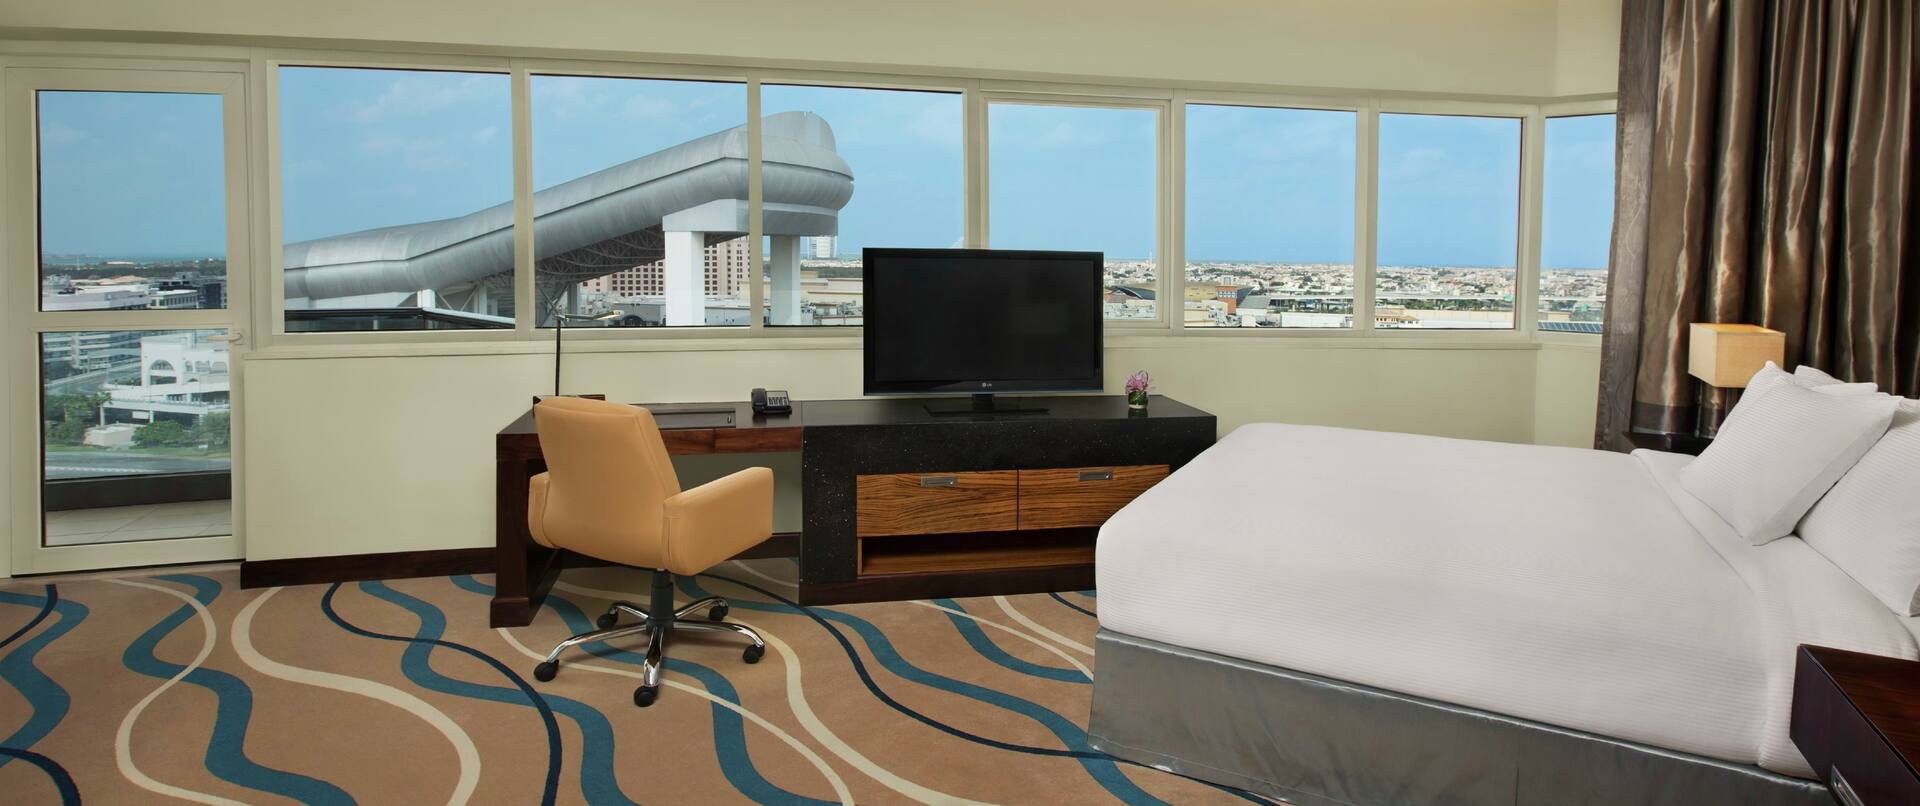 King Guestroom with Bed, Work Desk, Room Technology, and Outside View